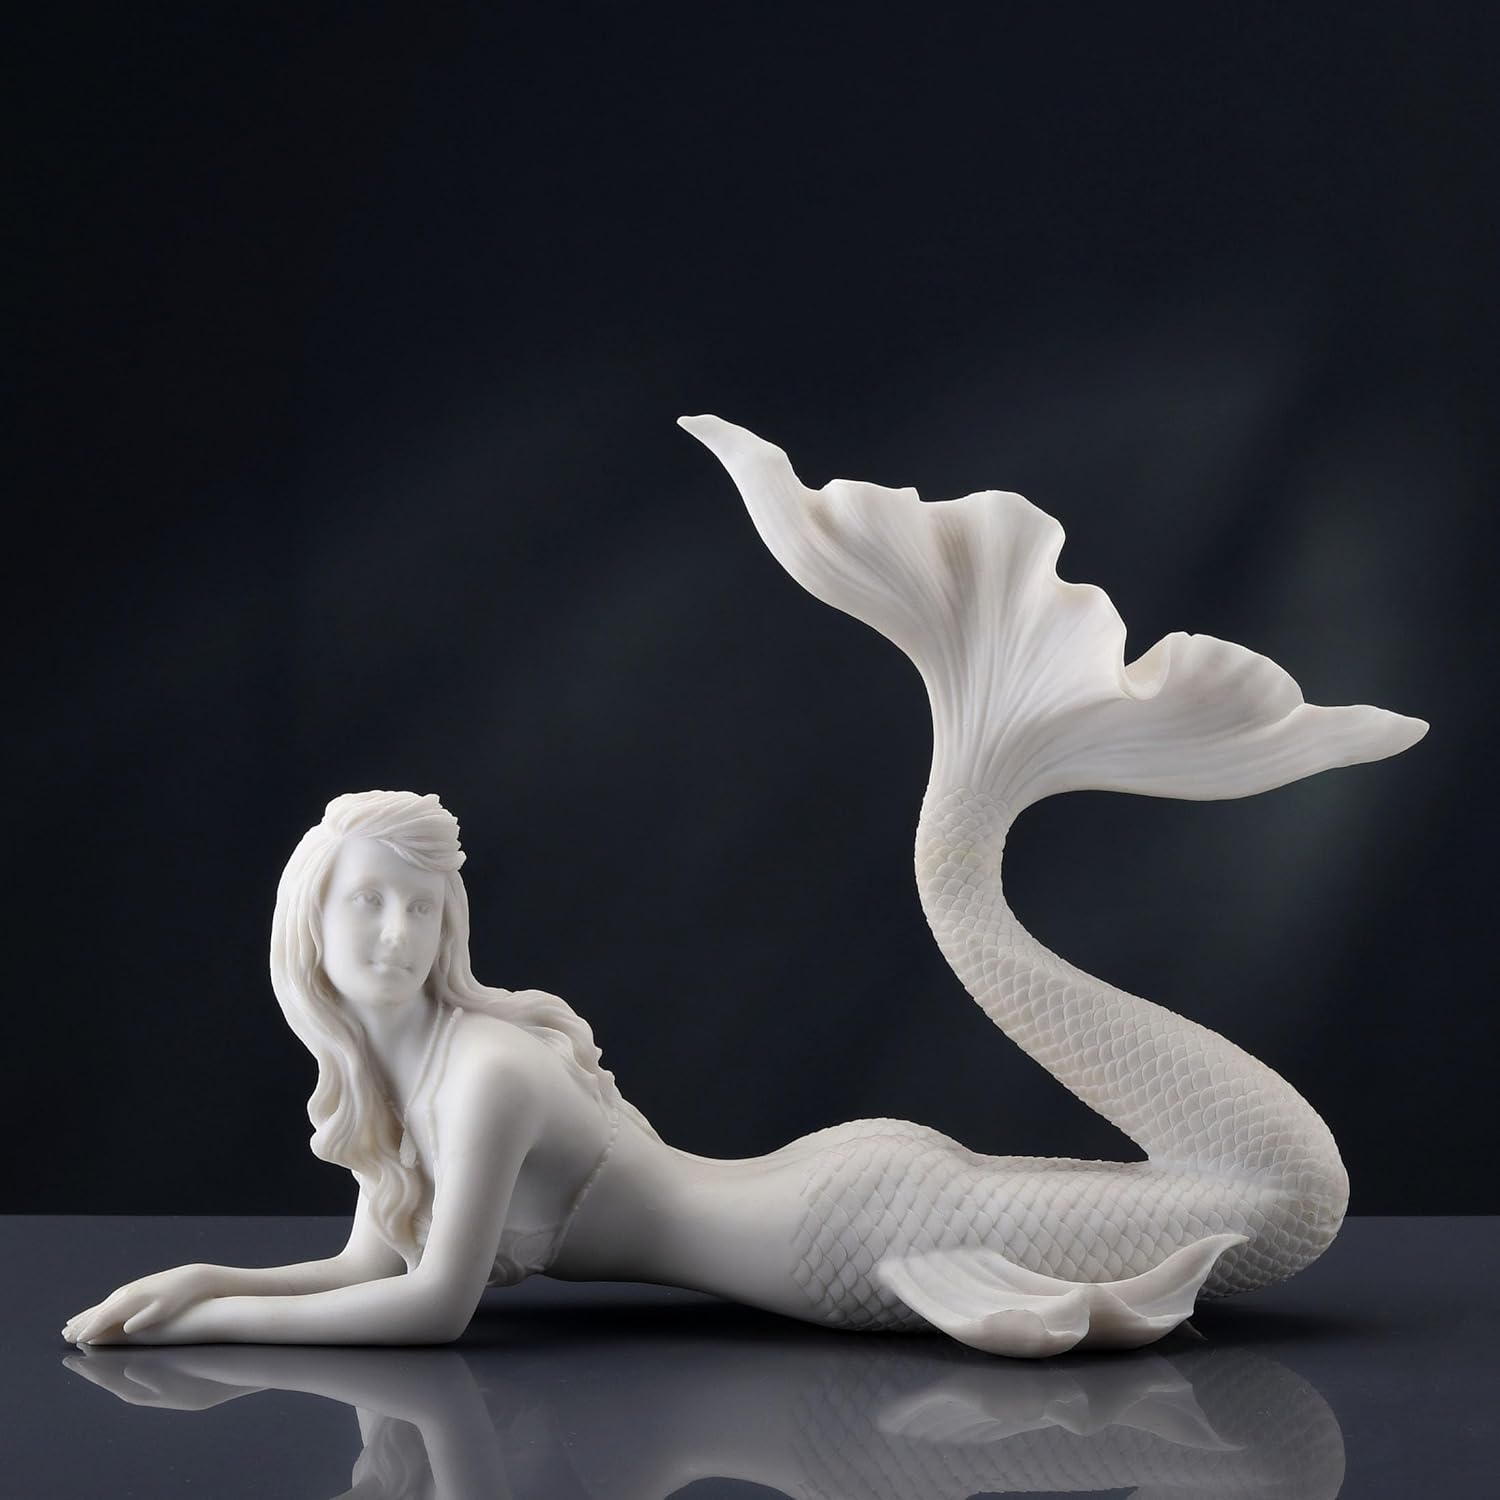 Mermaid Lying Down 11 Inch
(Marble White Color)